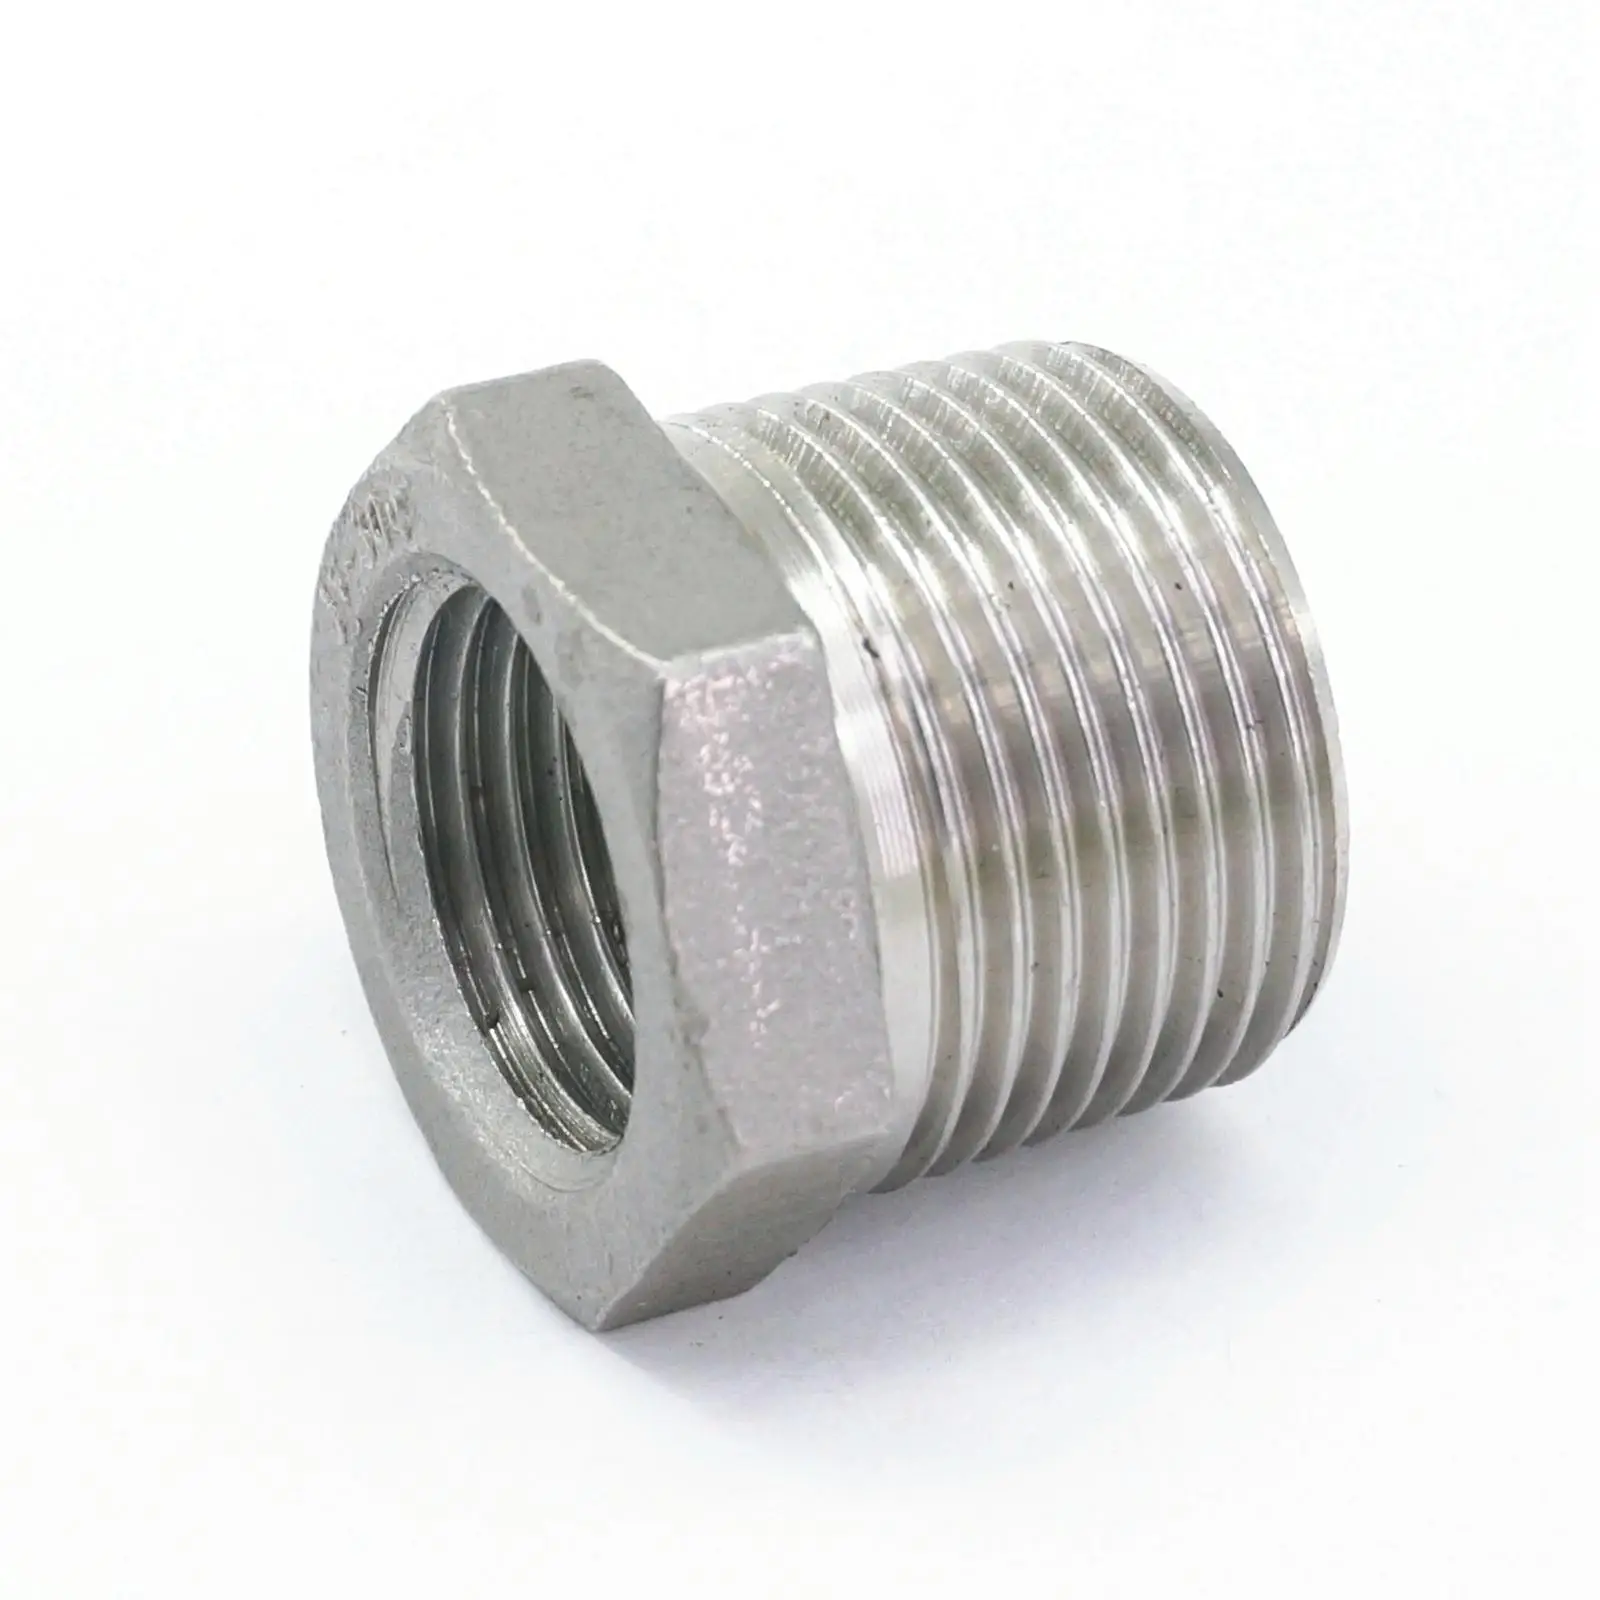 1/4" BSP Reducing Bushing Stainless Steel 304 Pipe Fitting 1/2" Male 